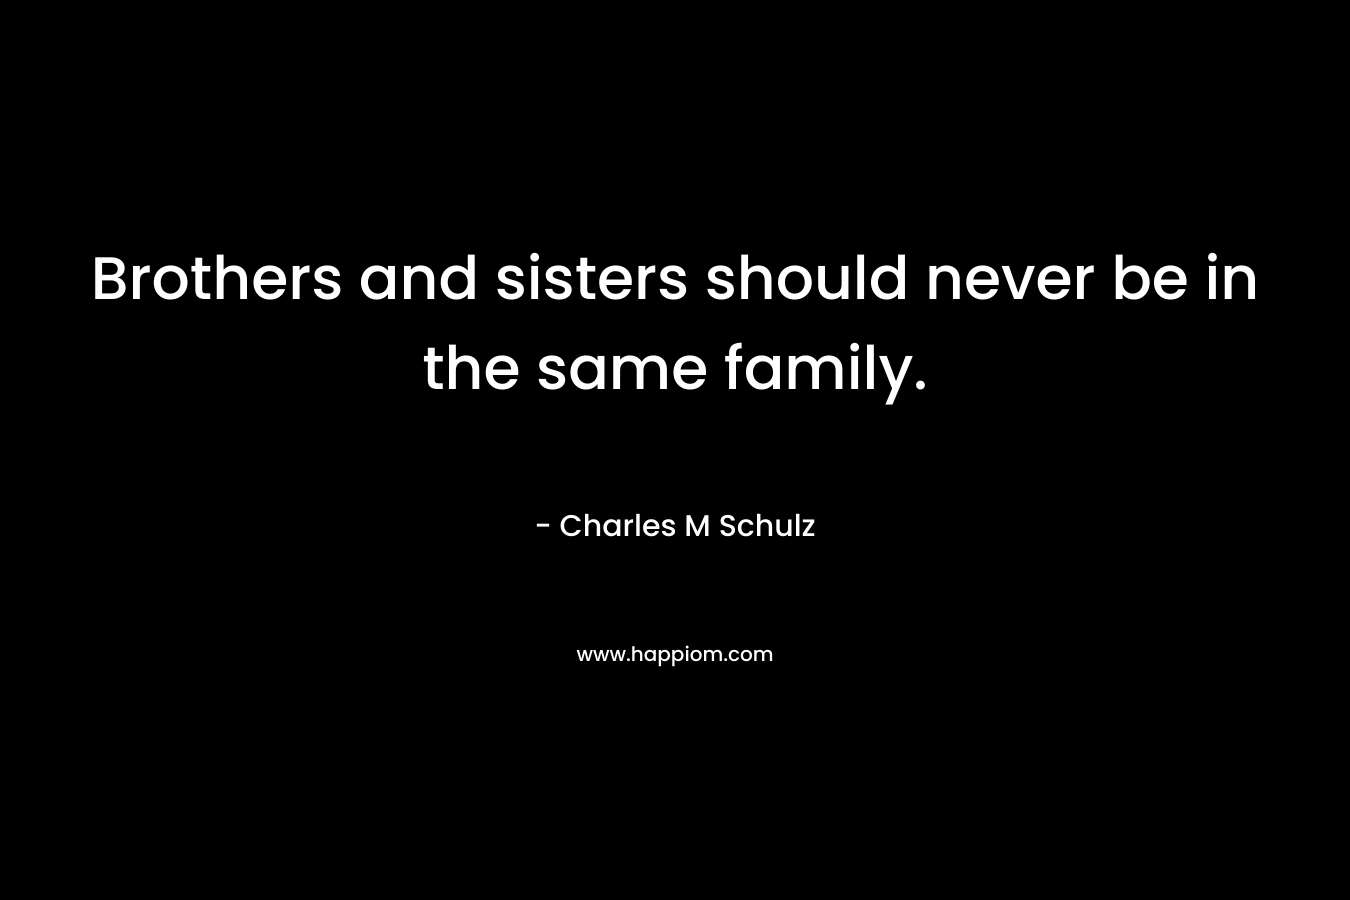 Brothers and sisters should never be in the same family.